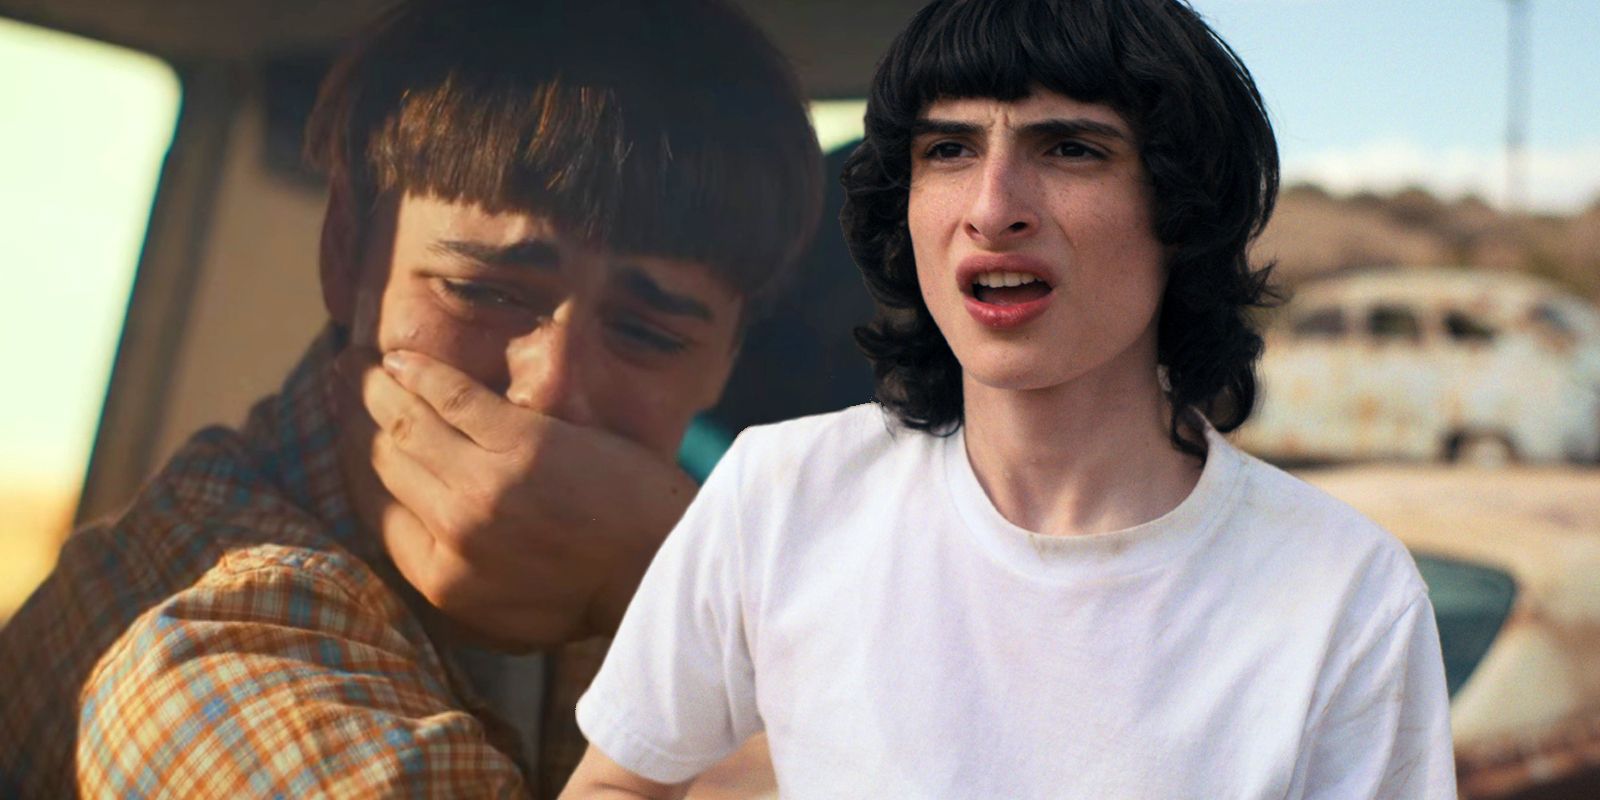 Noah Schnapp as Will crying and Finn Wolfhard as Mike in Stranger Things